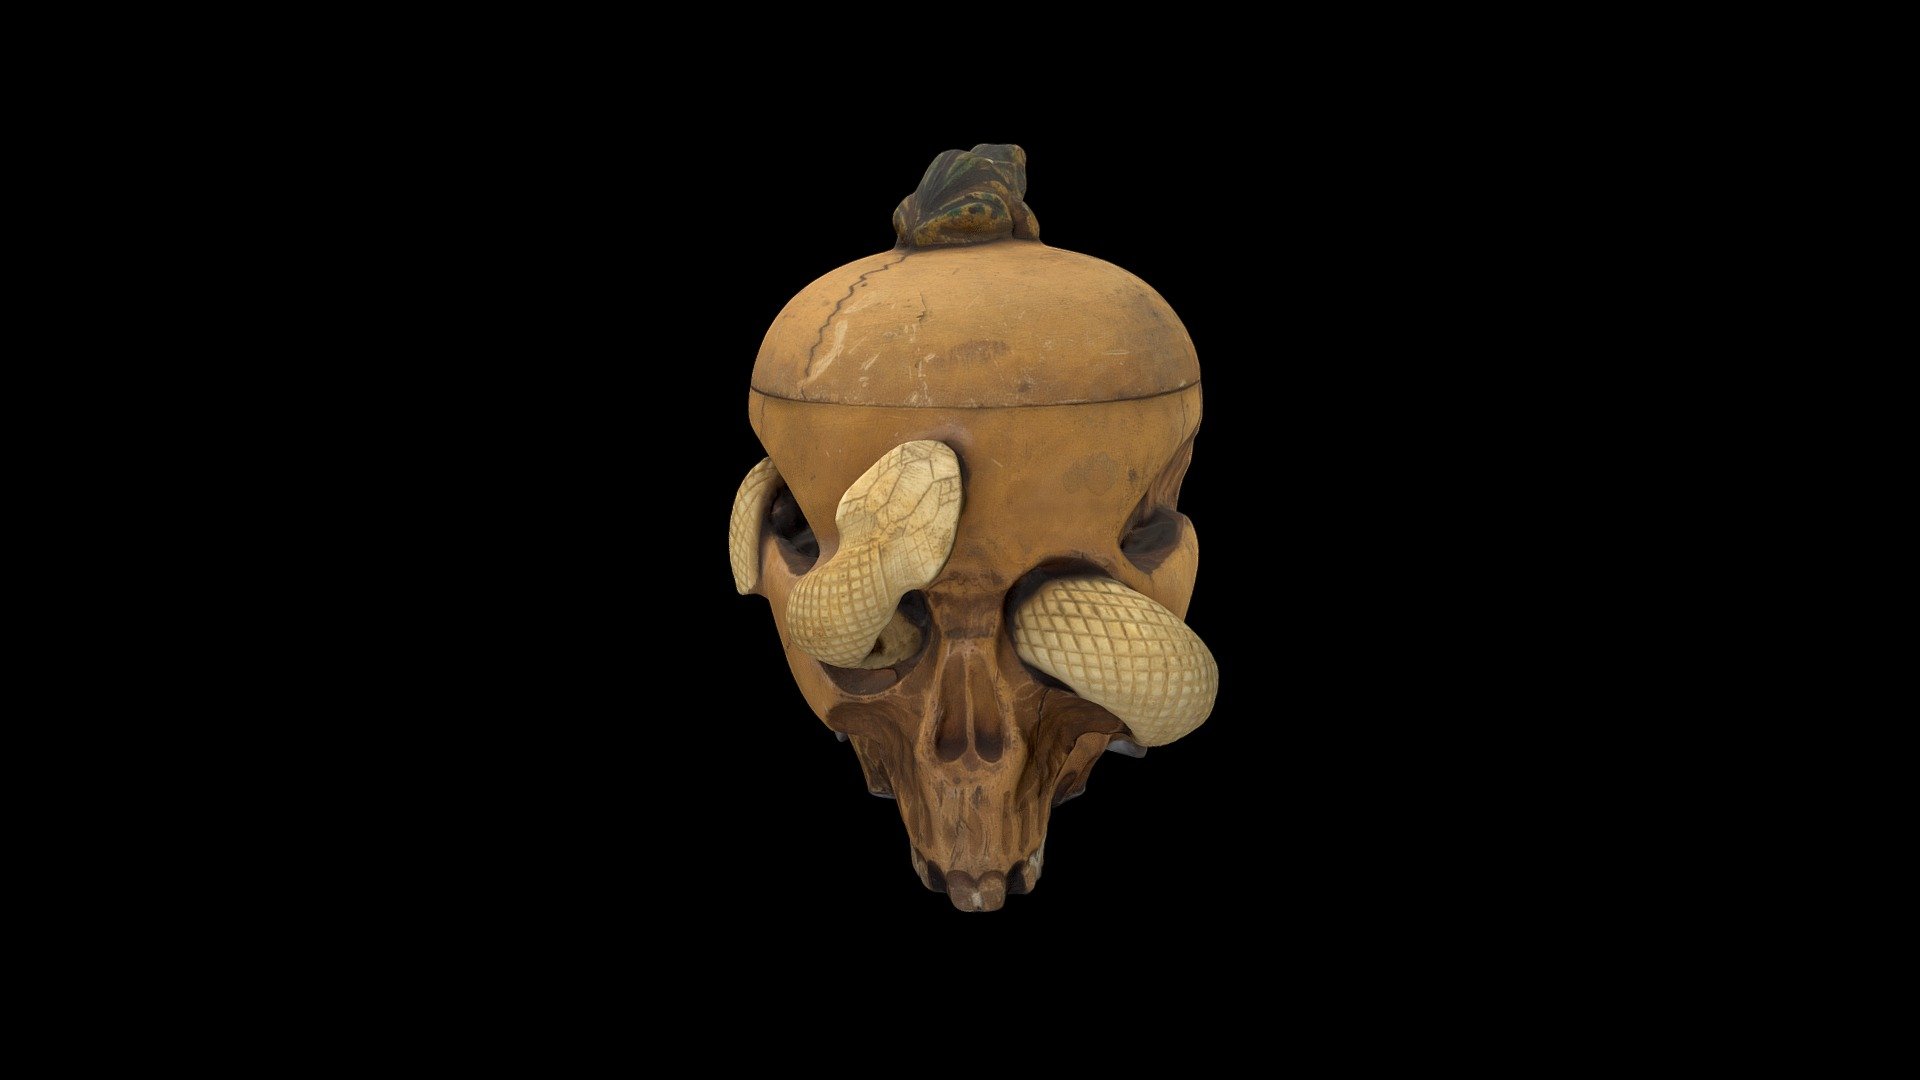 Tobacco jar in the shape of a skull